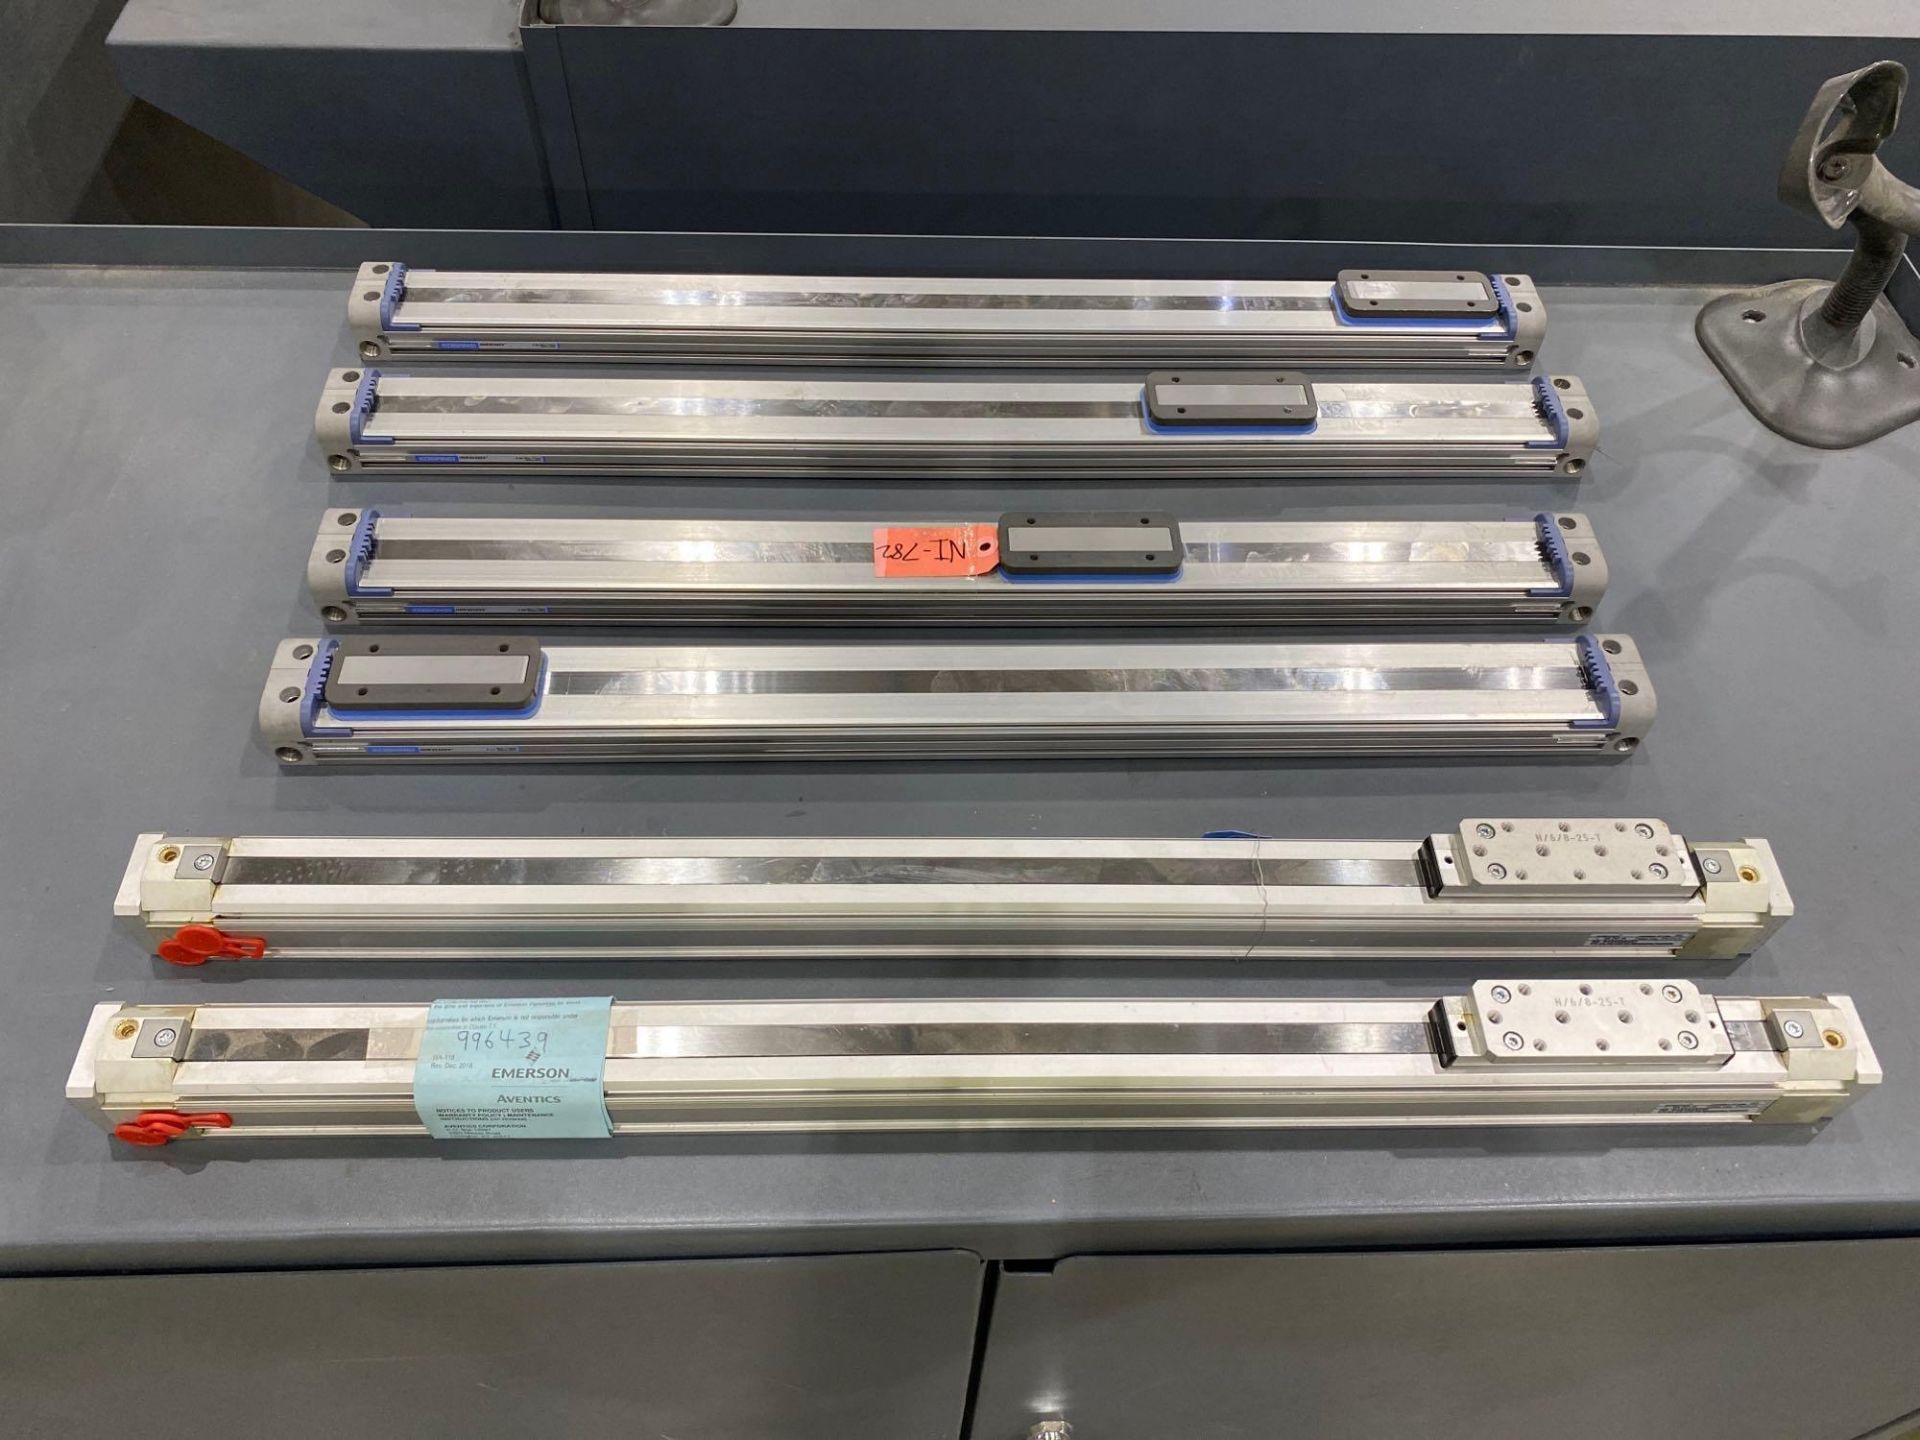 Assorted Pneumatic Cylinders